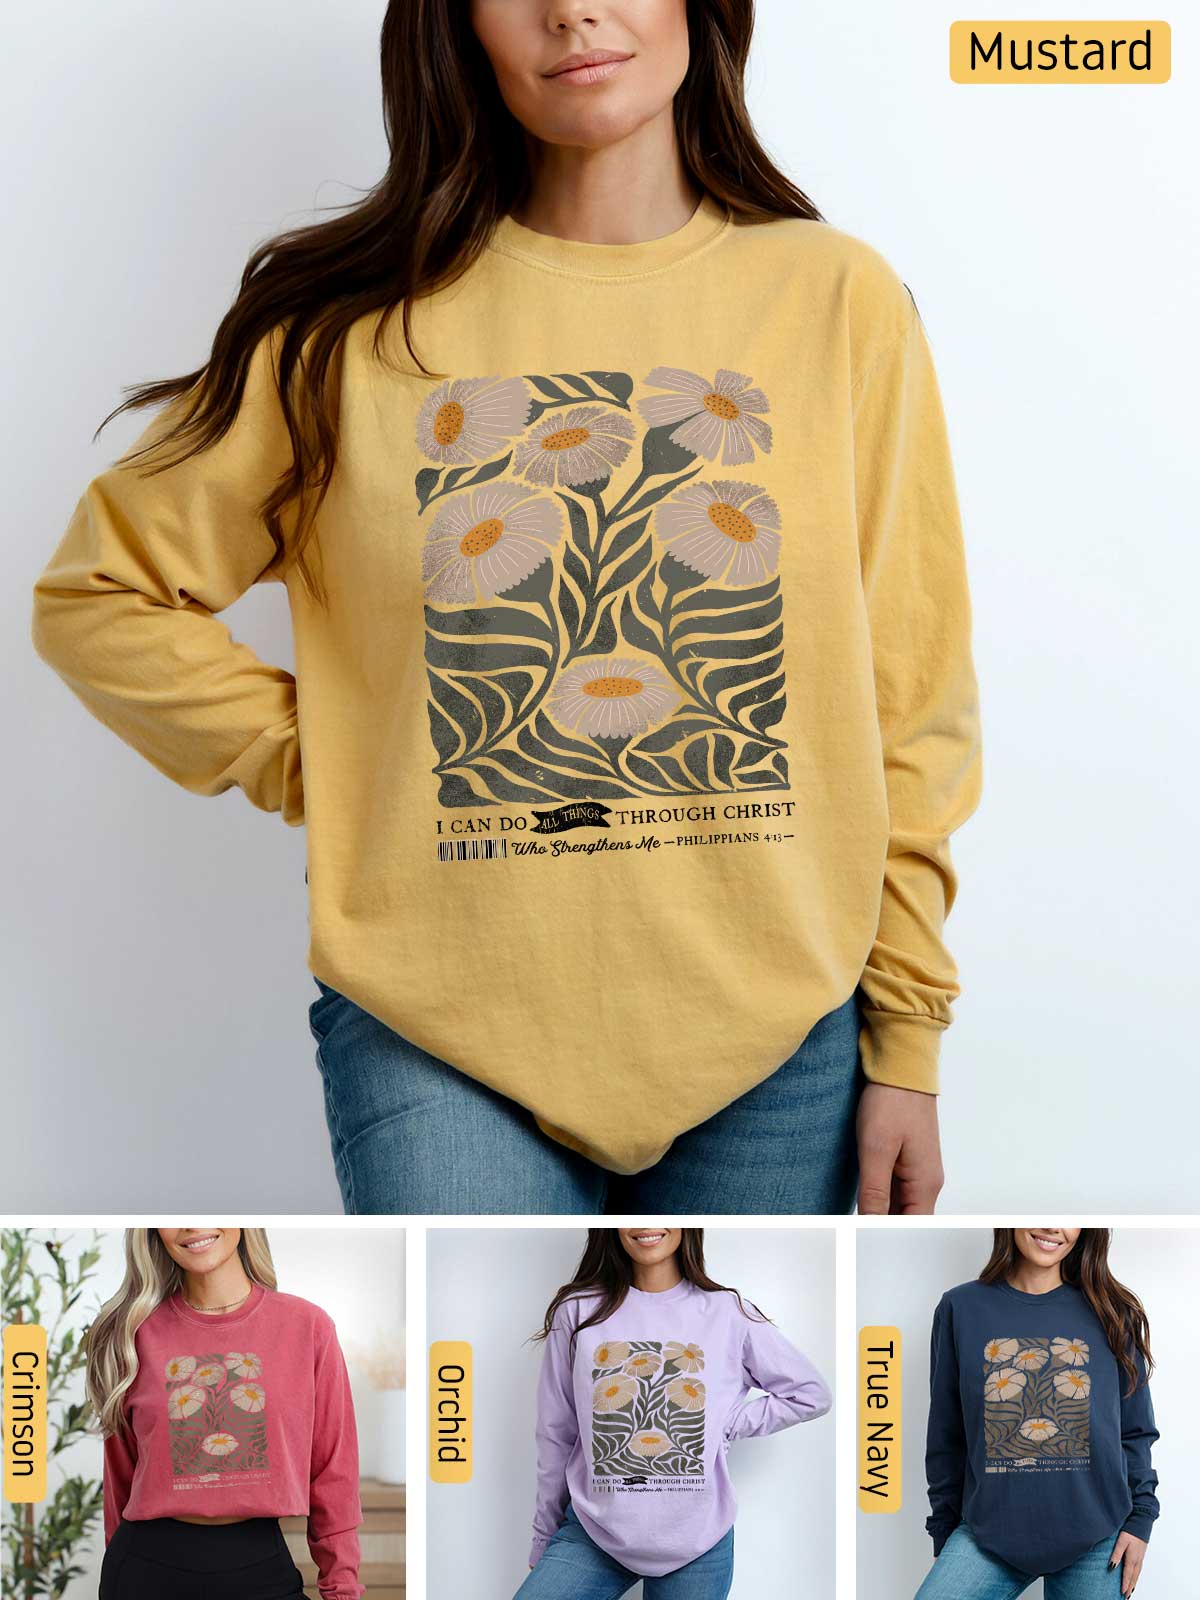 a woman wearing a mustard colored sweatshirt with flowers on it